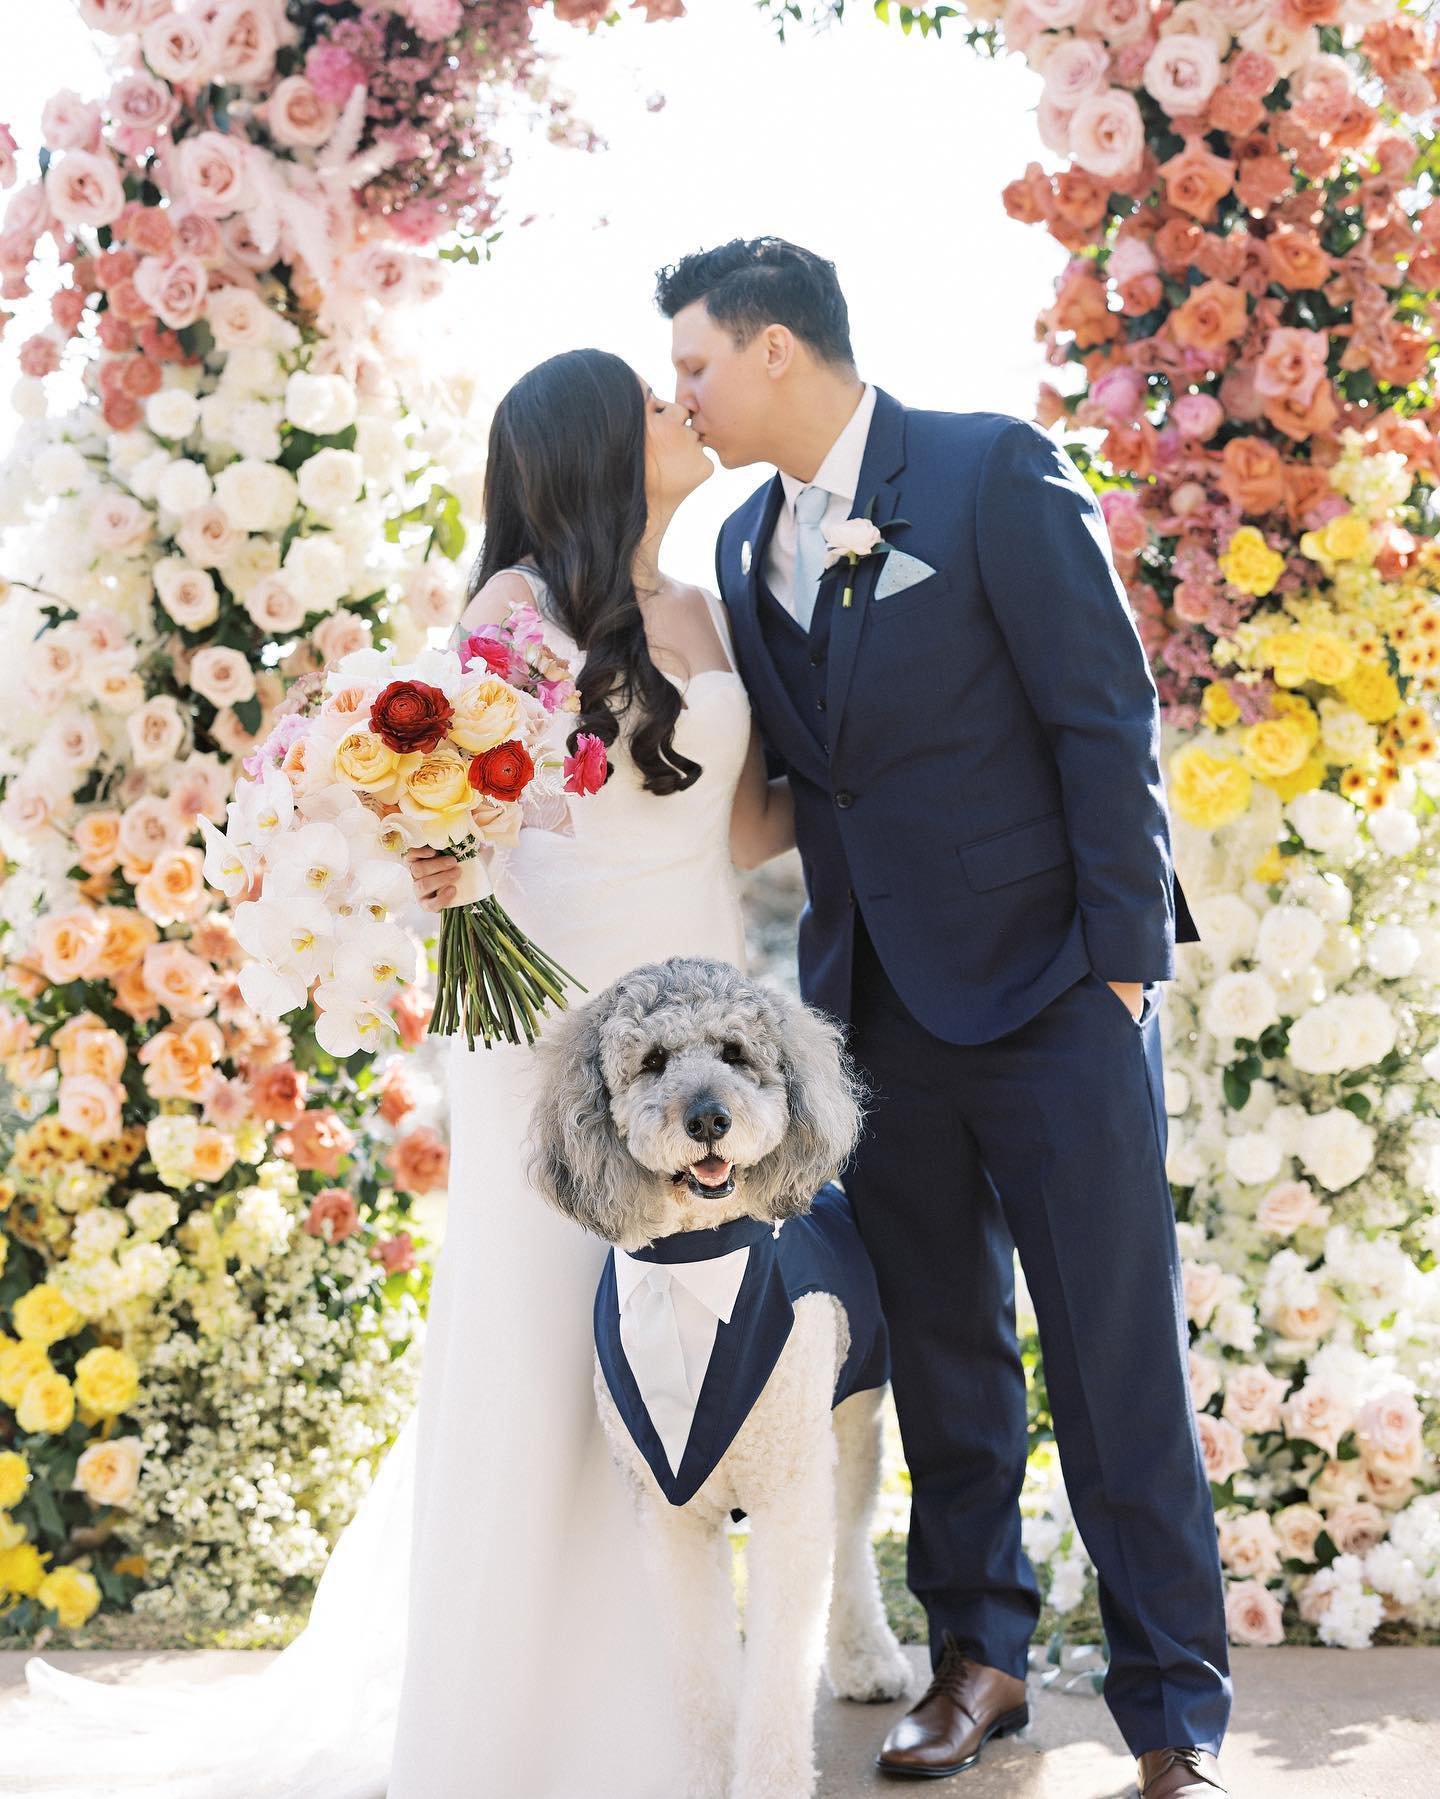 Low key obsessing over *every* dog detail in this gorgeous wedding, by planner @birddogwedding. From Ollie's pup tux matching the groom and groomsmen, to the sweet &quot;I do too!&quot; cake topper which was also placed every so beautifully in the fl